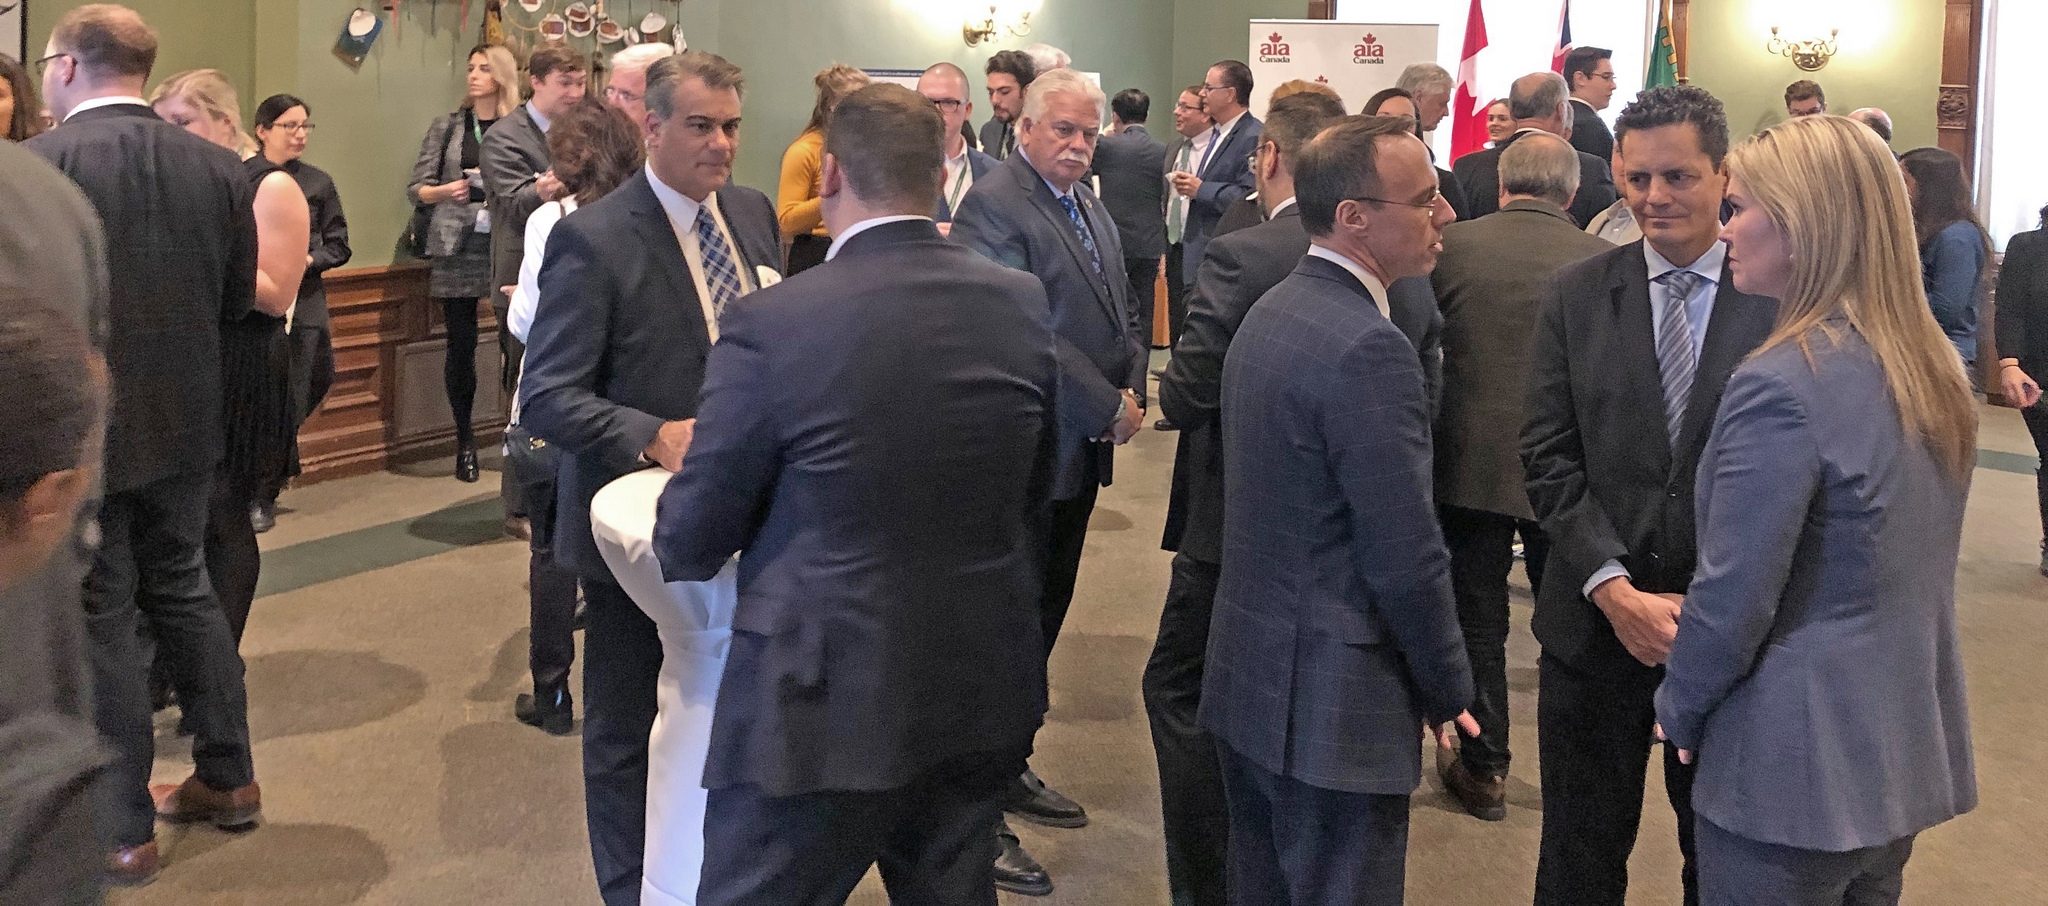 AIA Canada hosts successful Ontario Advocacy Day at Queen’s Park automotive aftermarket